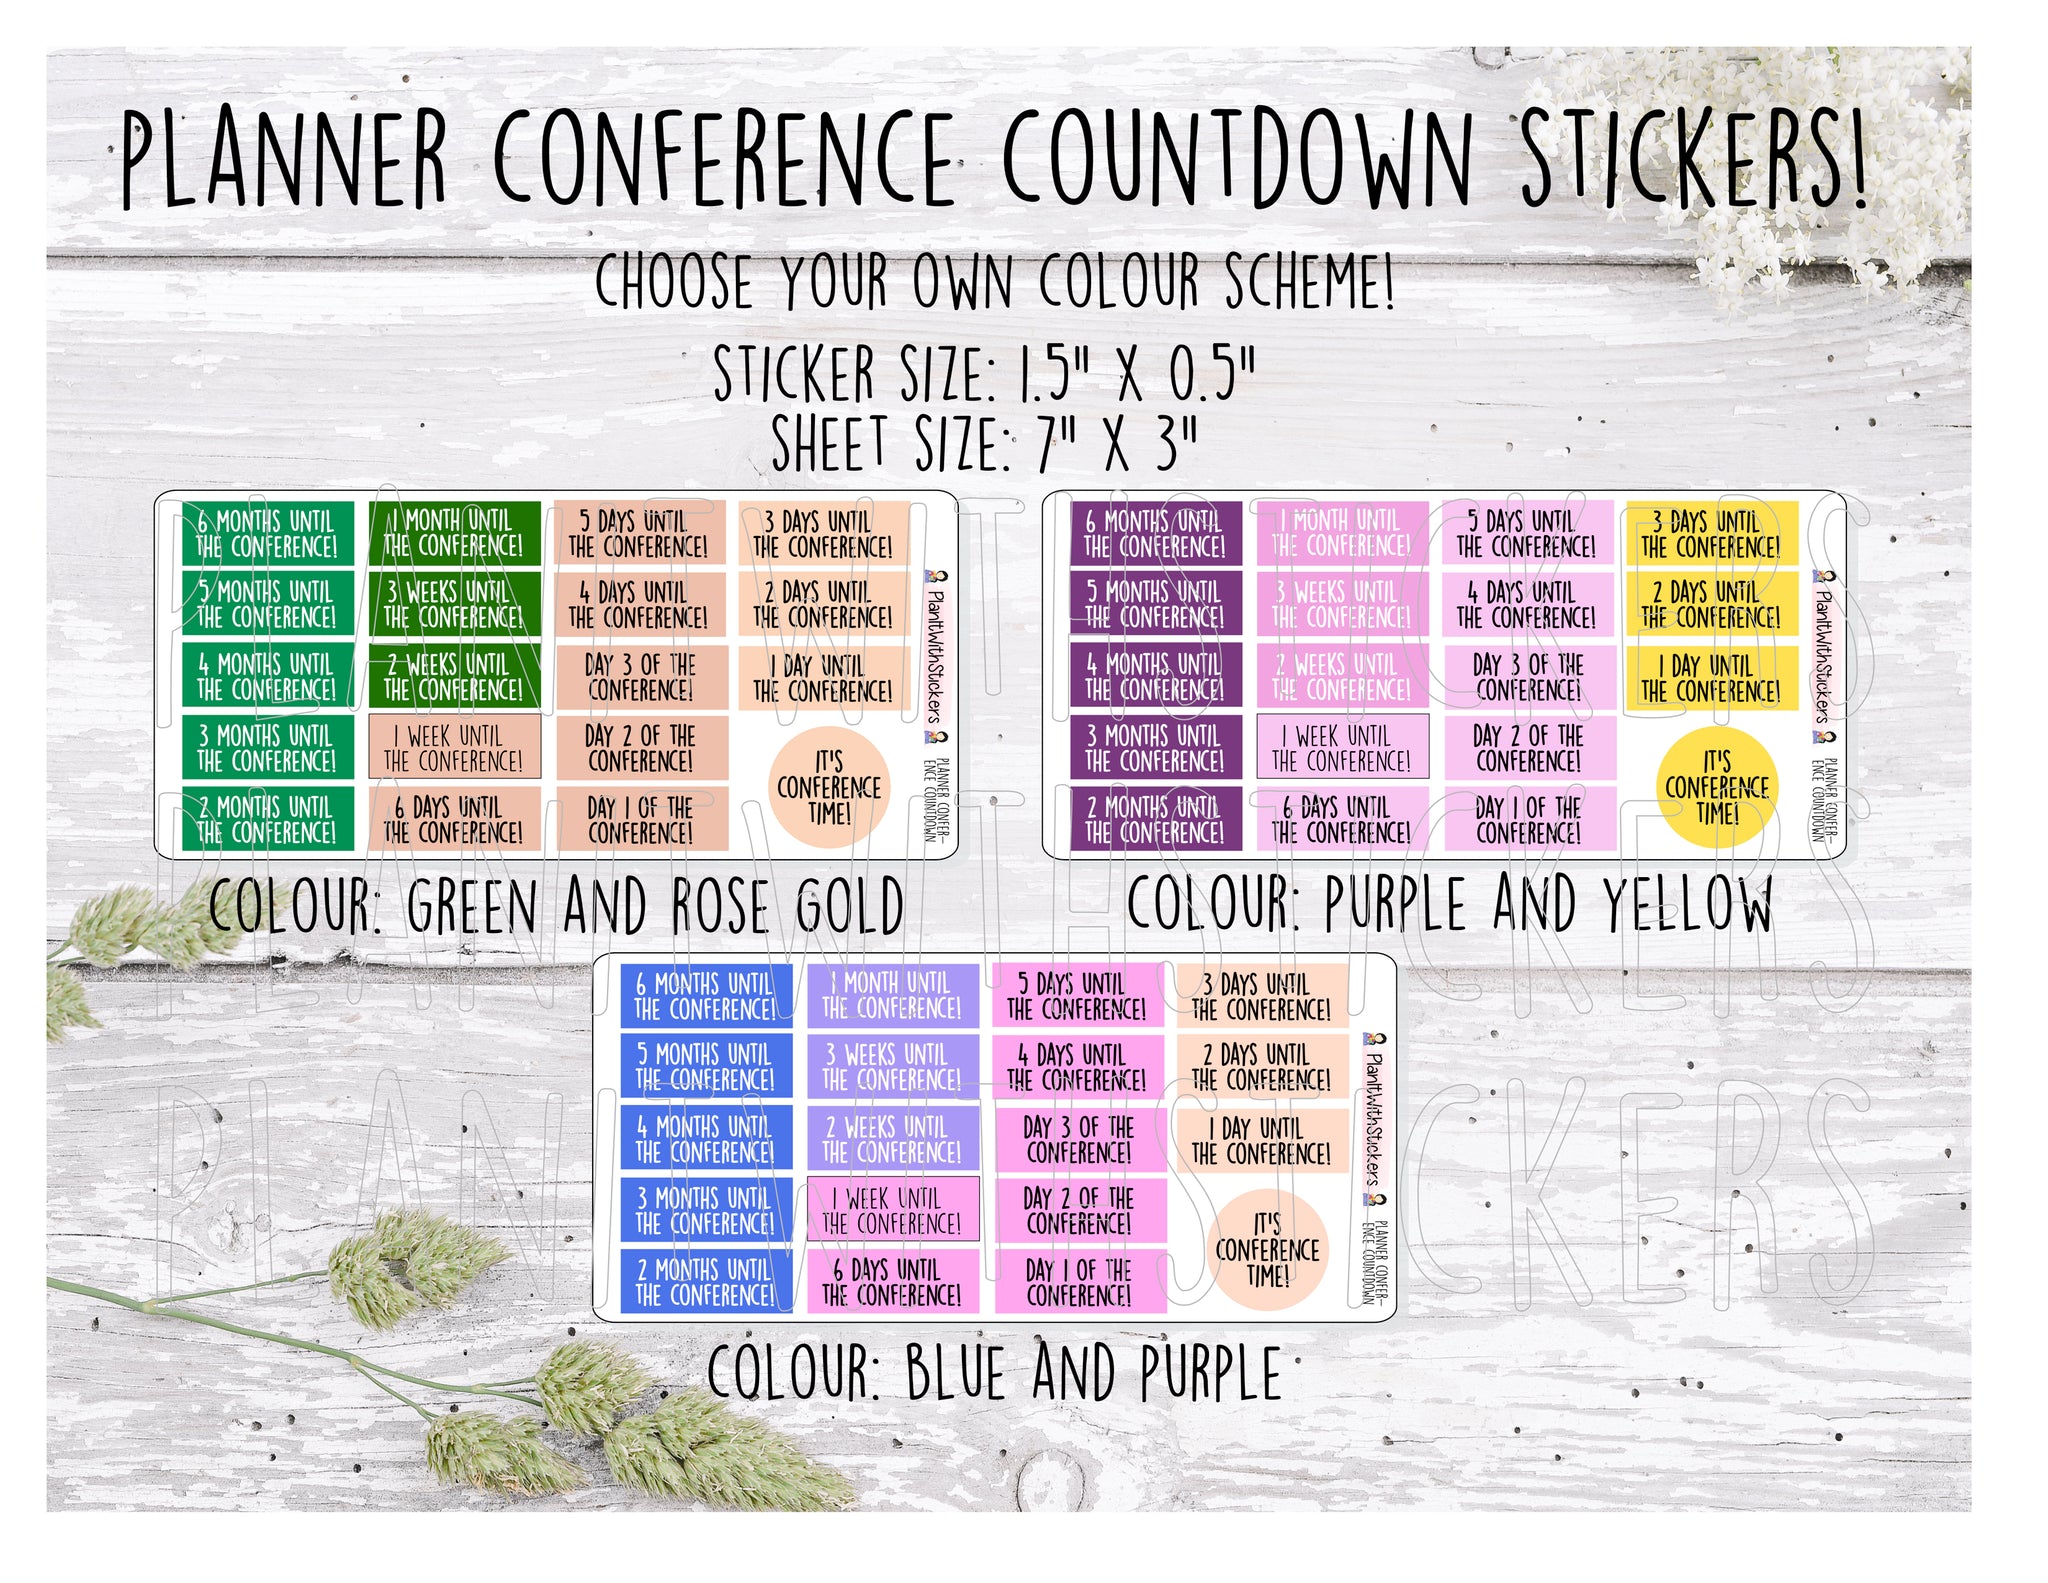 Planner Conference Countdown Stickers - MULTIPLE COLOURS TO CHOOSE FROM